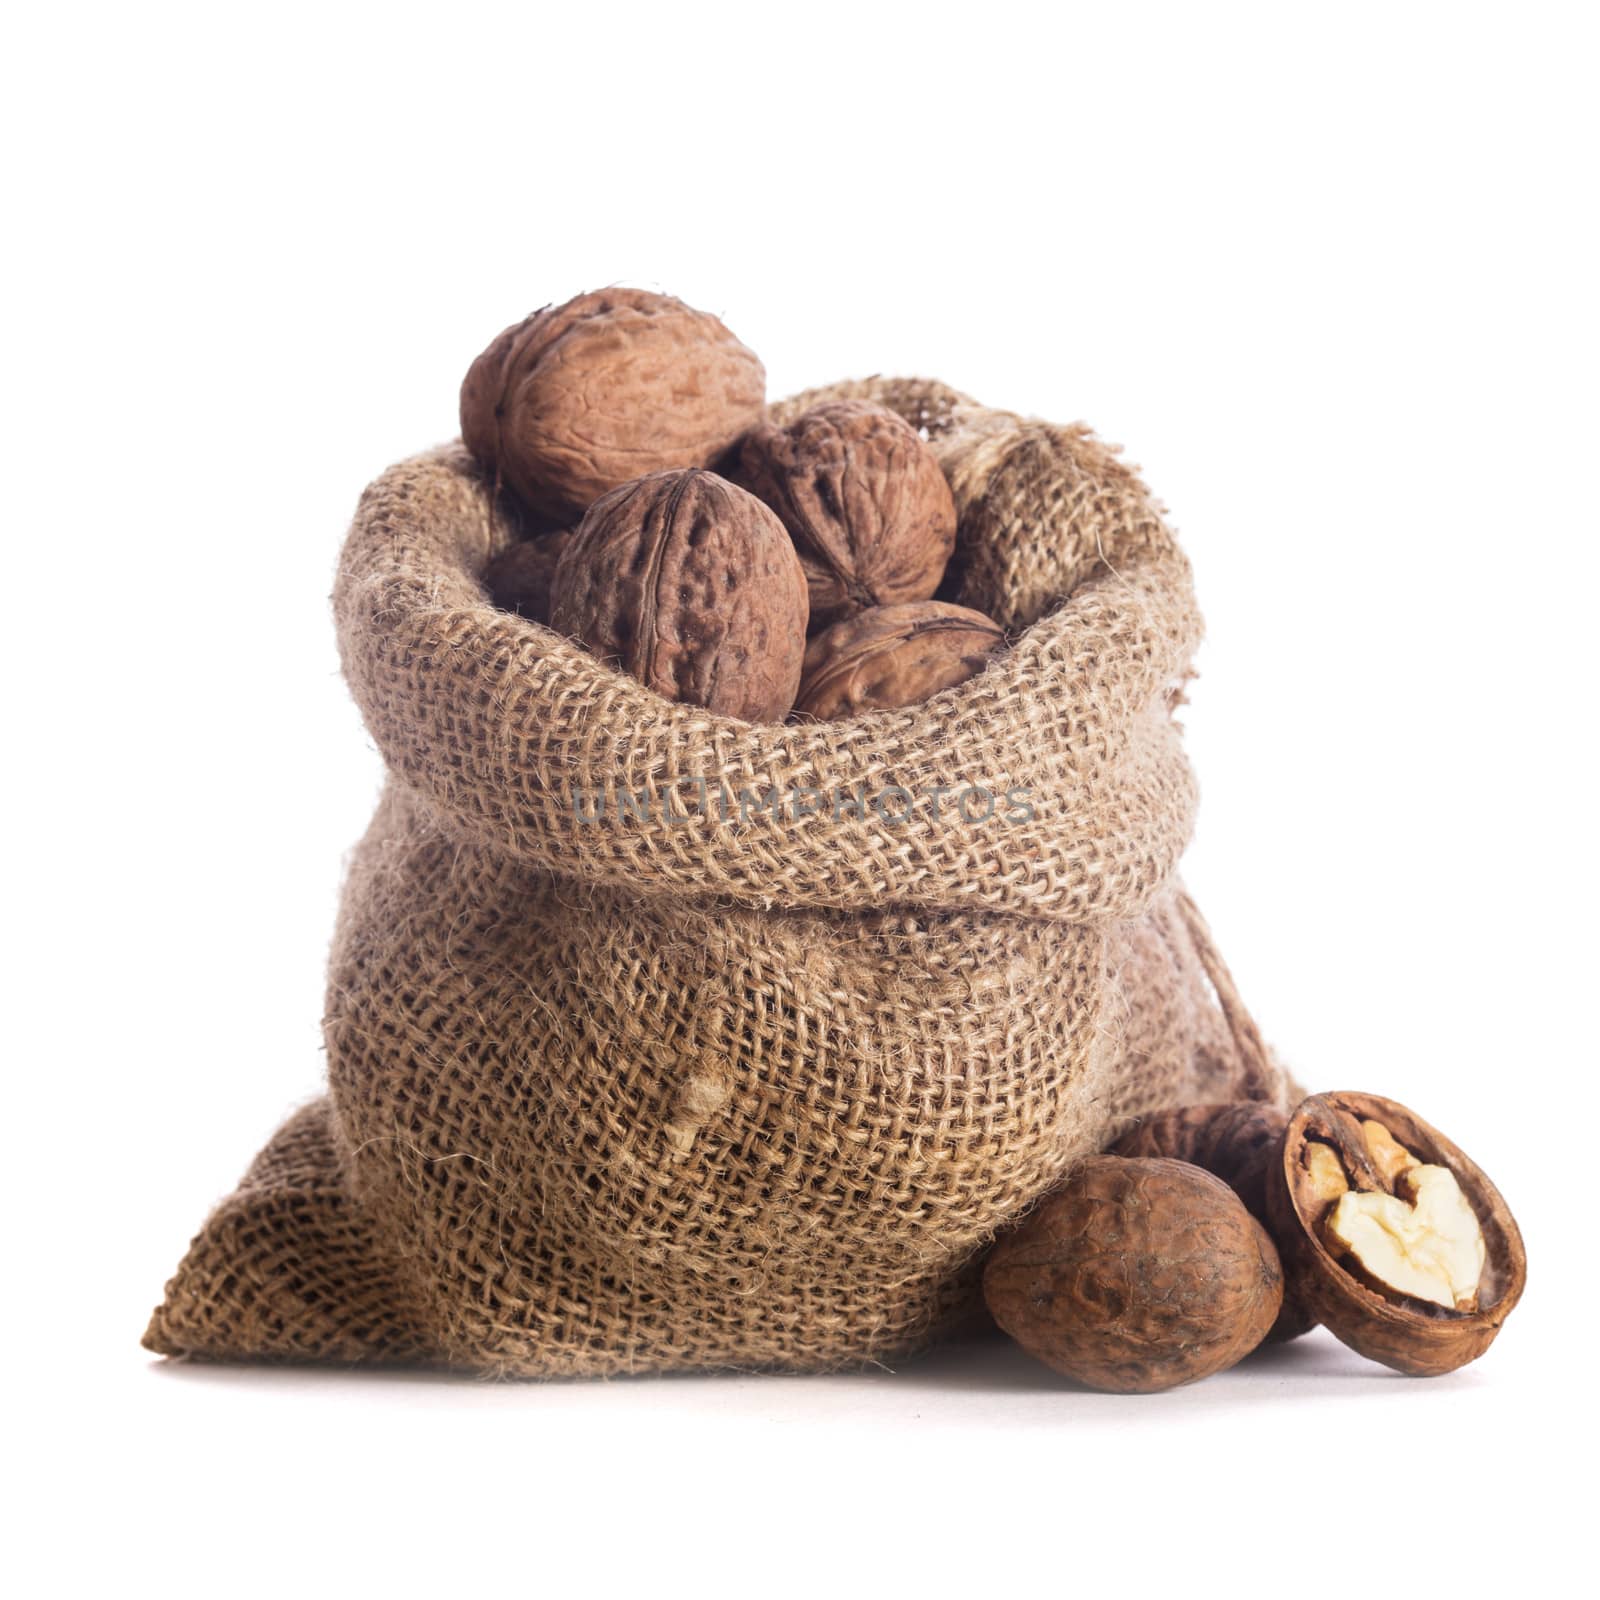 Walnuts in burlap bag isolated on white